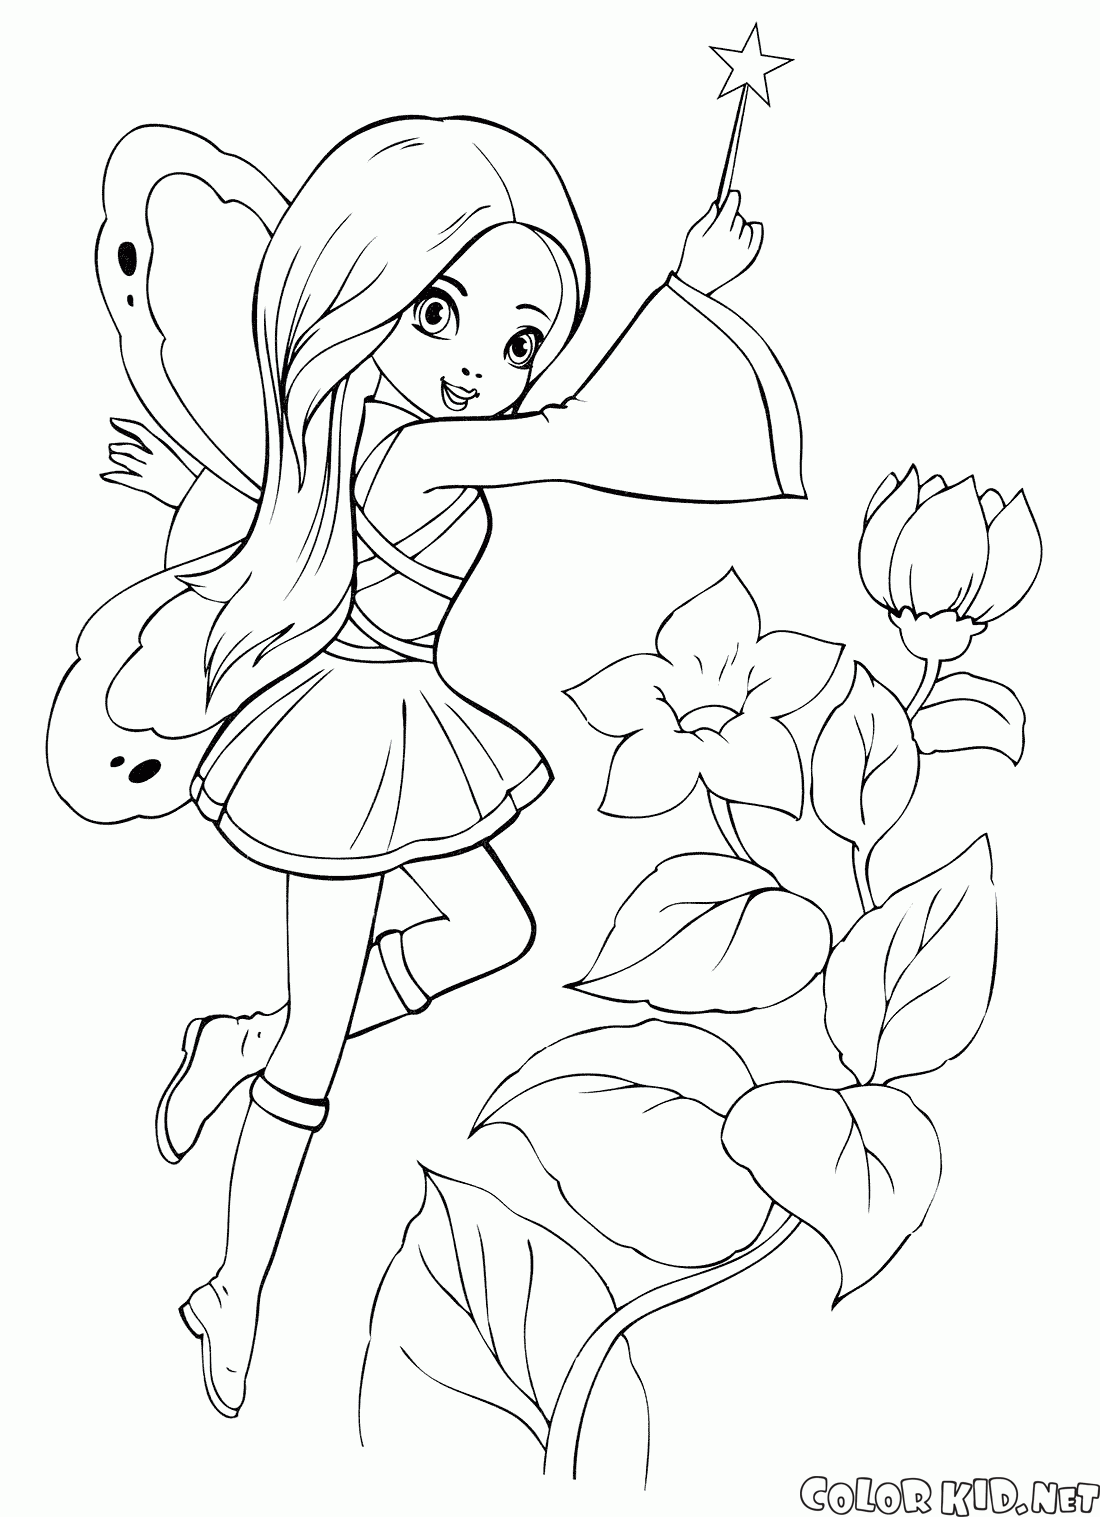 Coloring page - Fairy with a magic wand